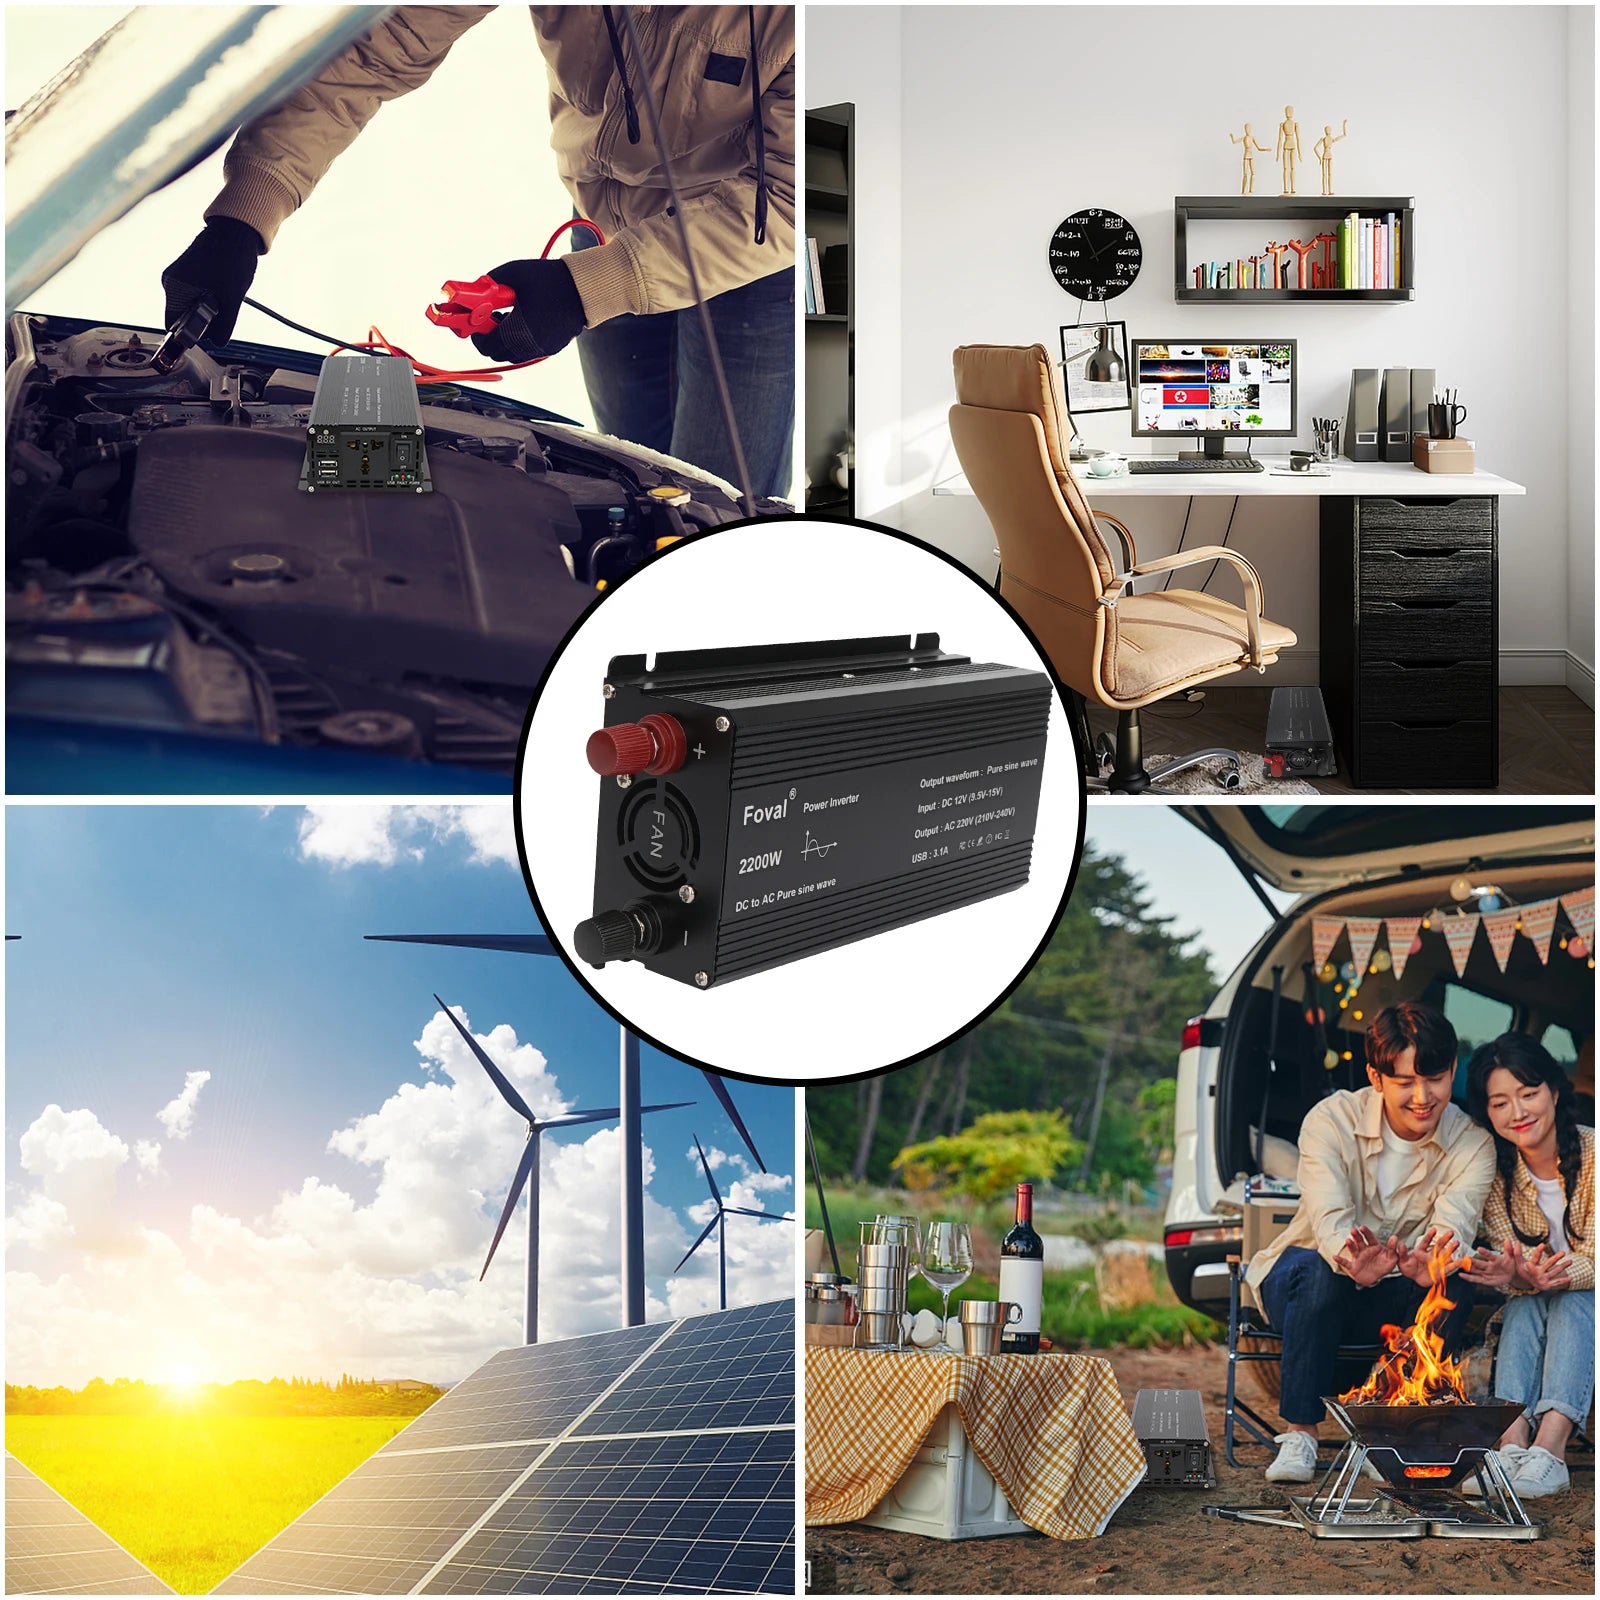 Pure Sine Wave Inverter converts DC power to AC power with adjustable output.